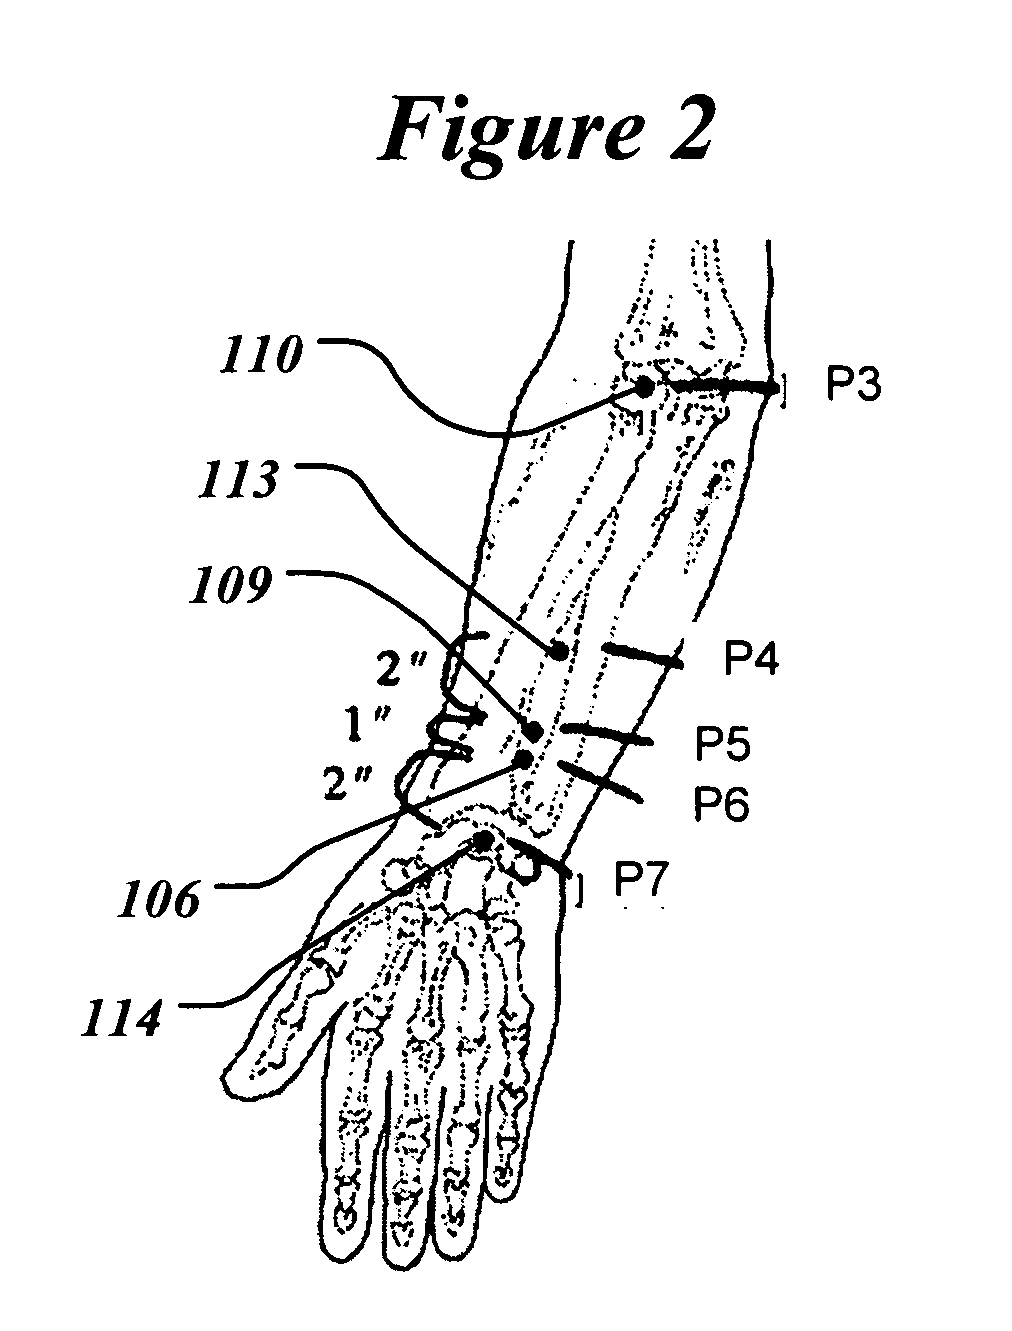 Implantable device and method for treatment of hypertension